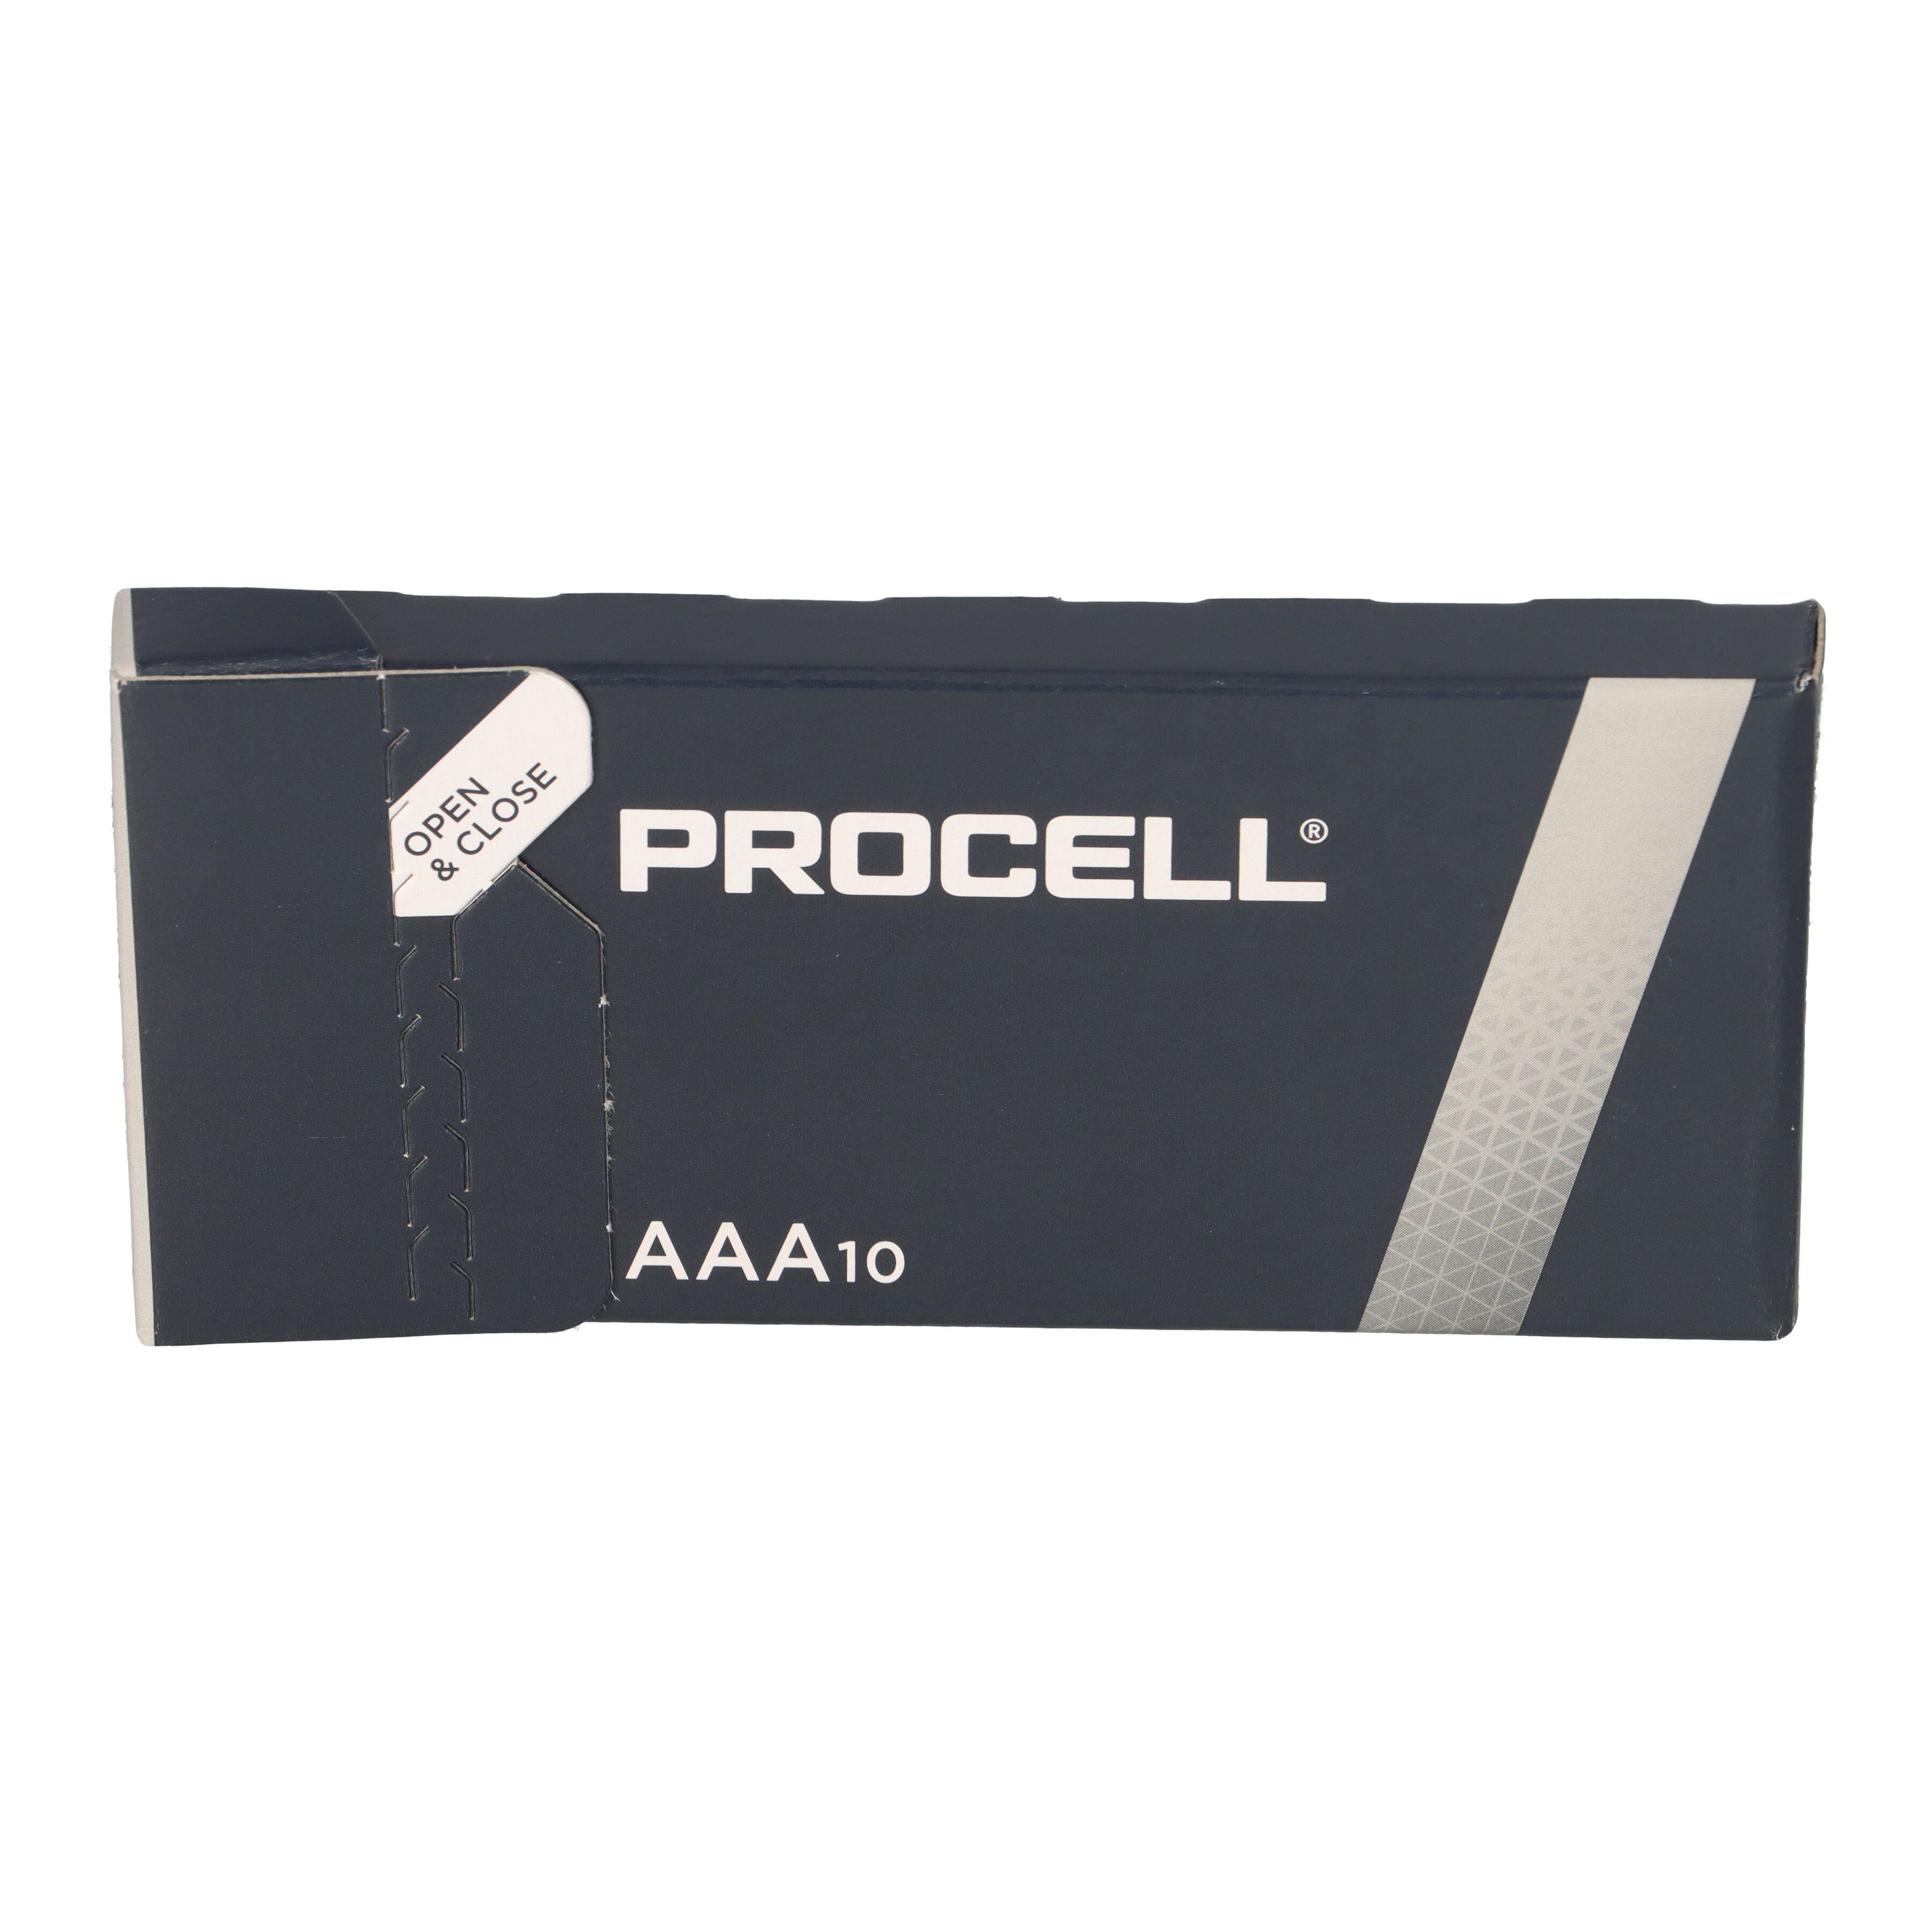 Duracell Micro AAA Batterie 10x Duracell Batterie MN2400 Procell